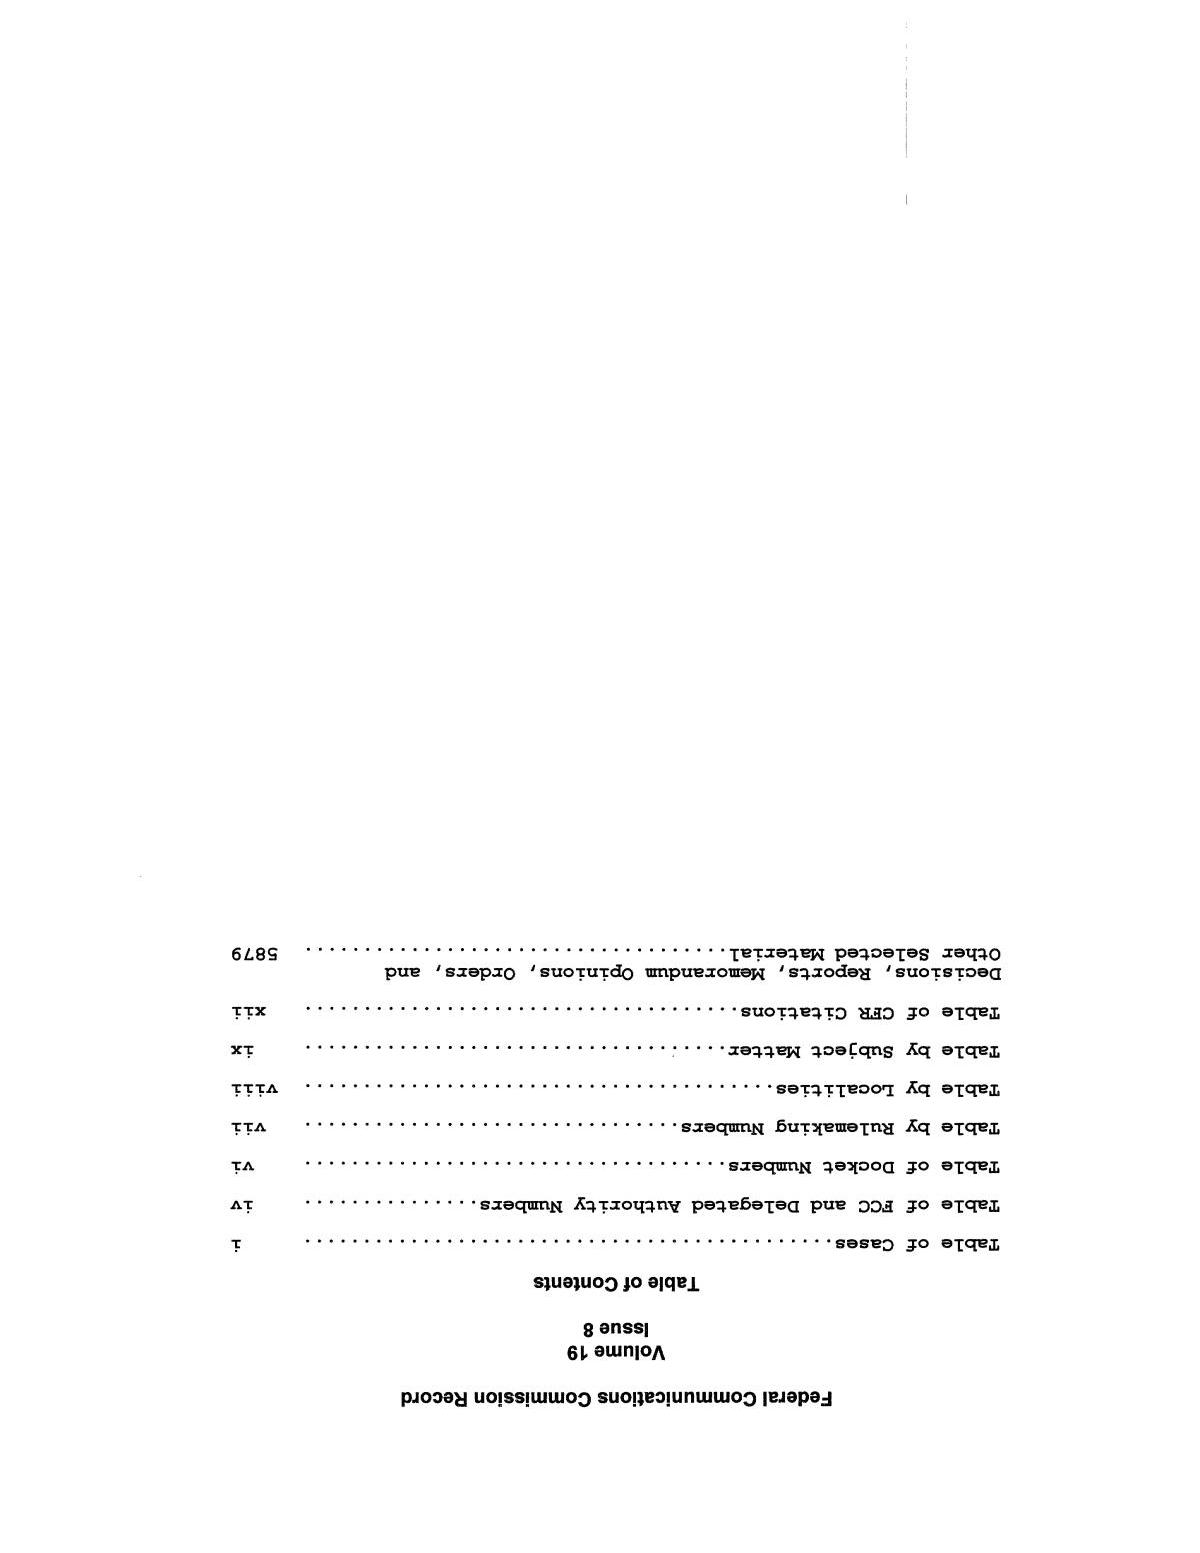 FCC Record, Volume 19, No. 8, Pages 5879 to 6813, March 31 - April 13, 2004
                                                
                                                    None
                                                